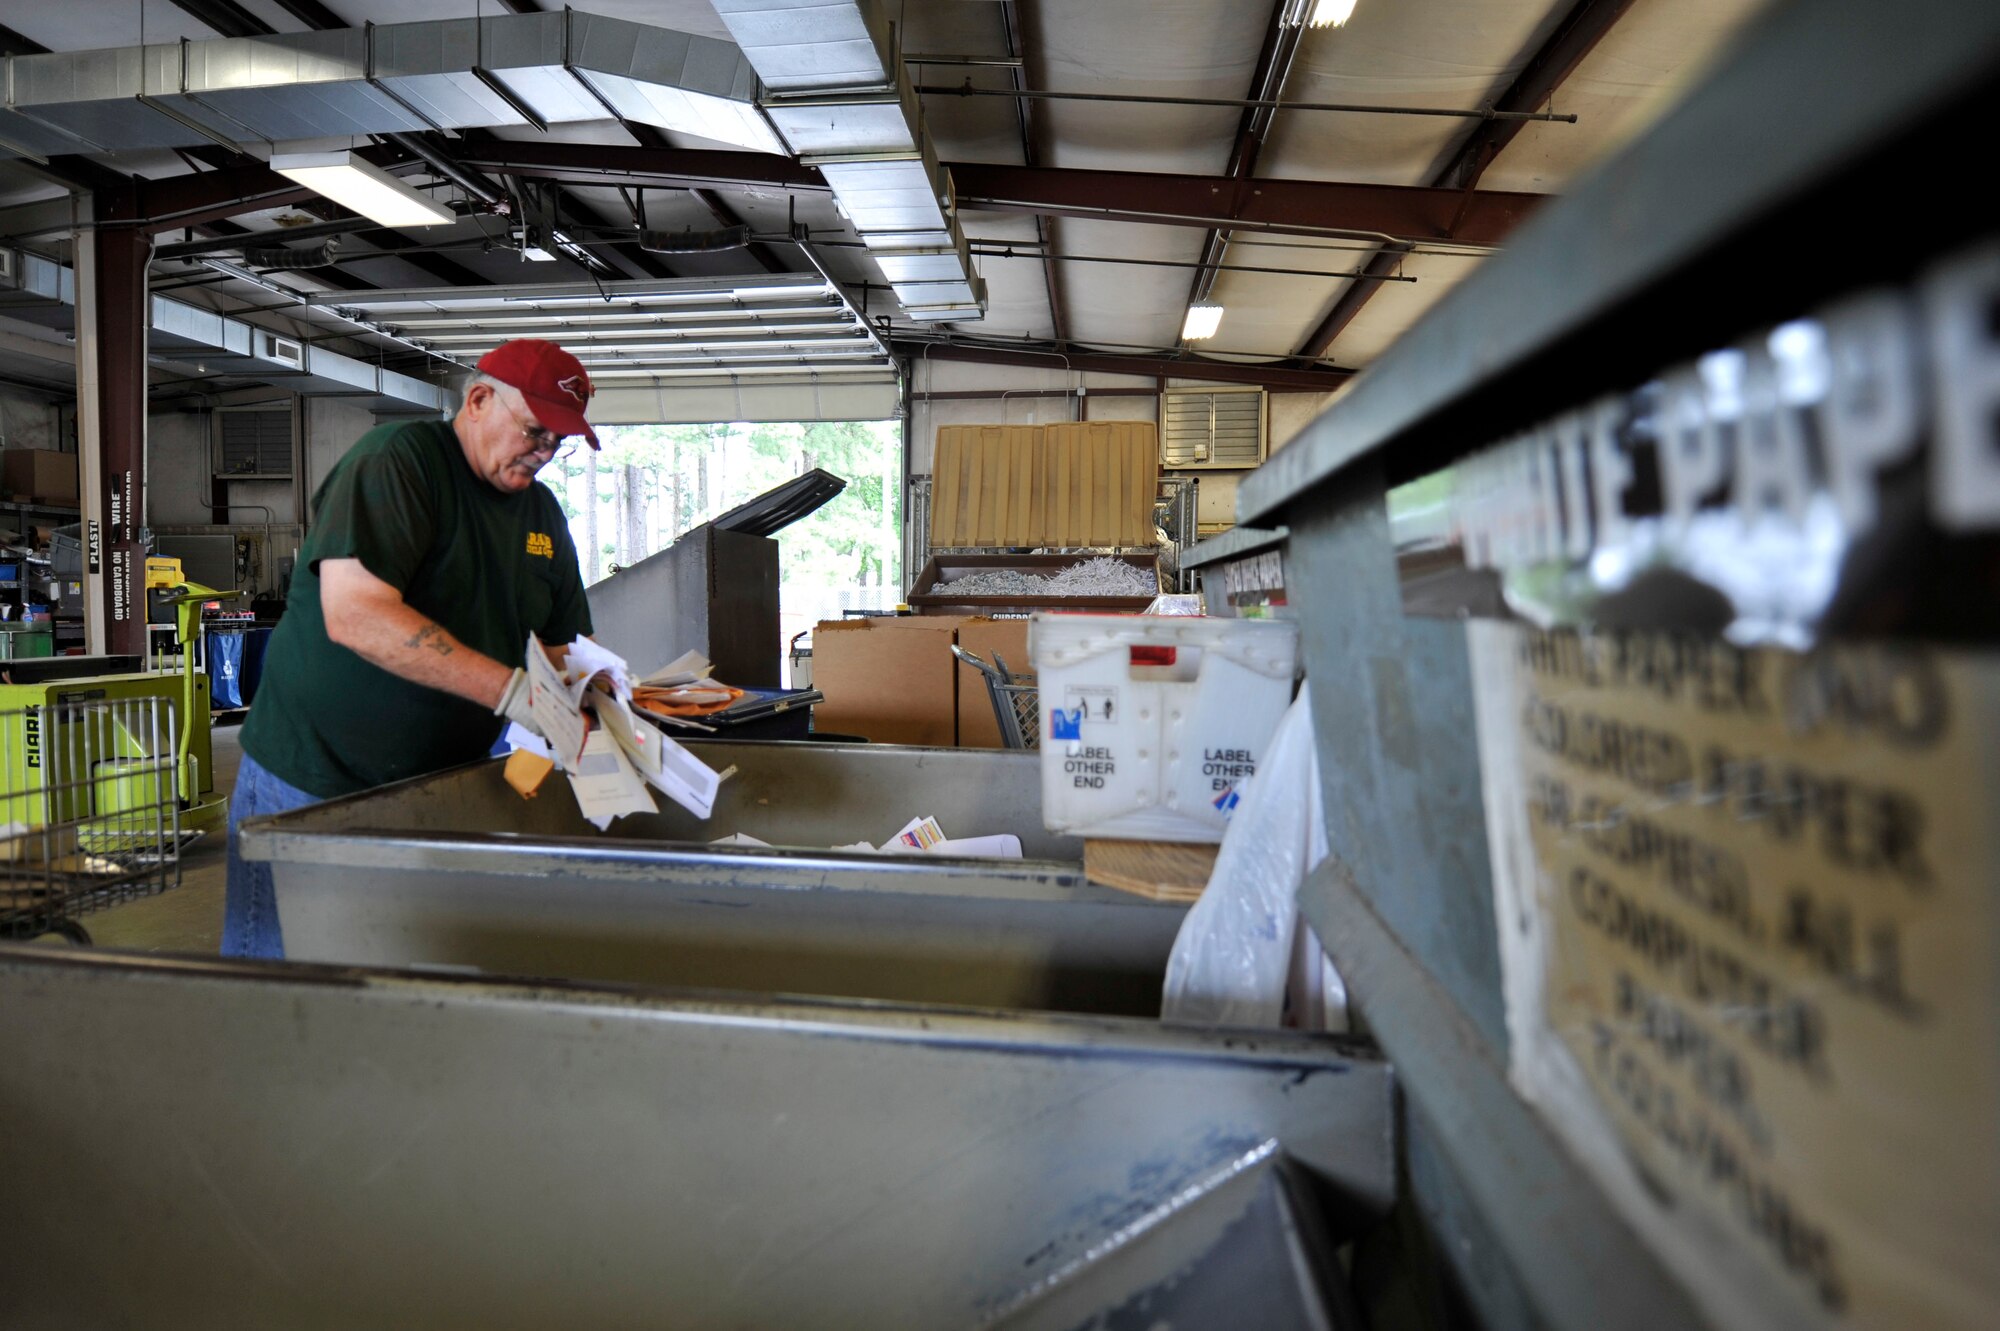 Wally Barron, Little Rock Air Force Base Recycling Center warehouse manager, sorts through white and colored paper July 8 2014, at Little Rock Air Force Base. Team Little Rock recycled approximately 2 million pounds of items last year. (U.S. Air Force photo by Senior Airman Regina Agoha)